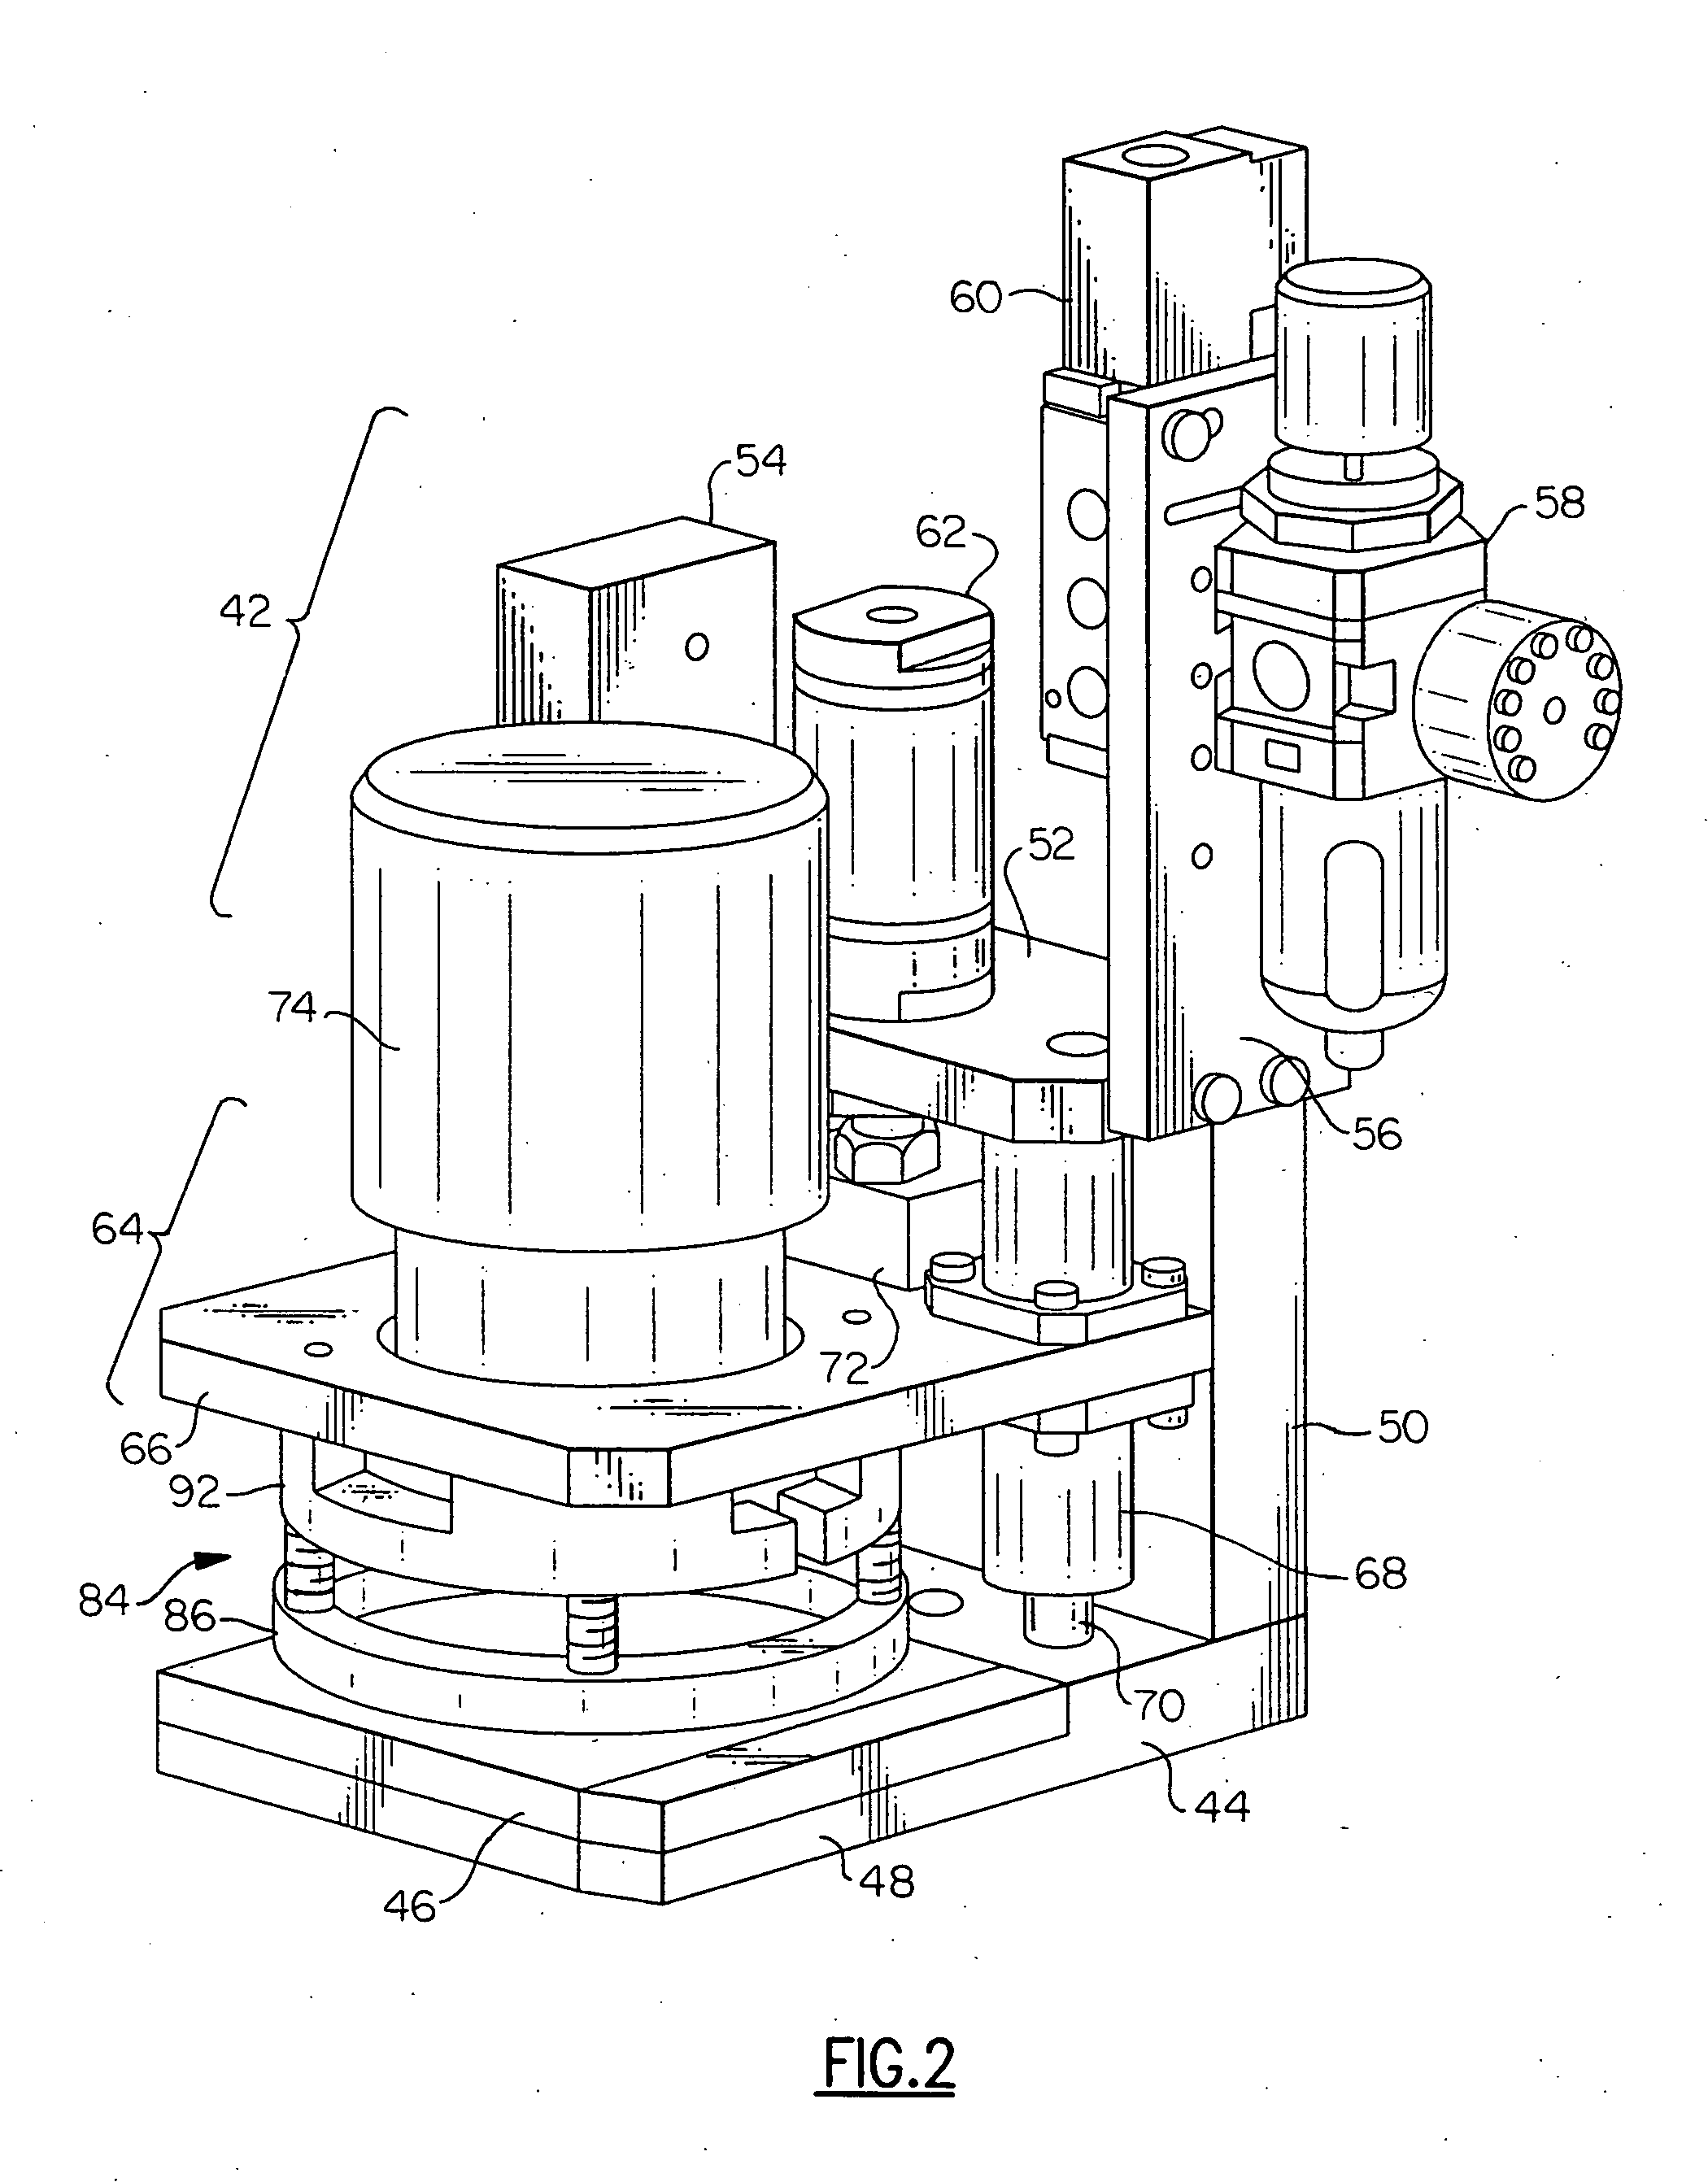 Punch assembly with spinning head